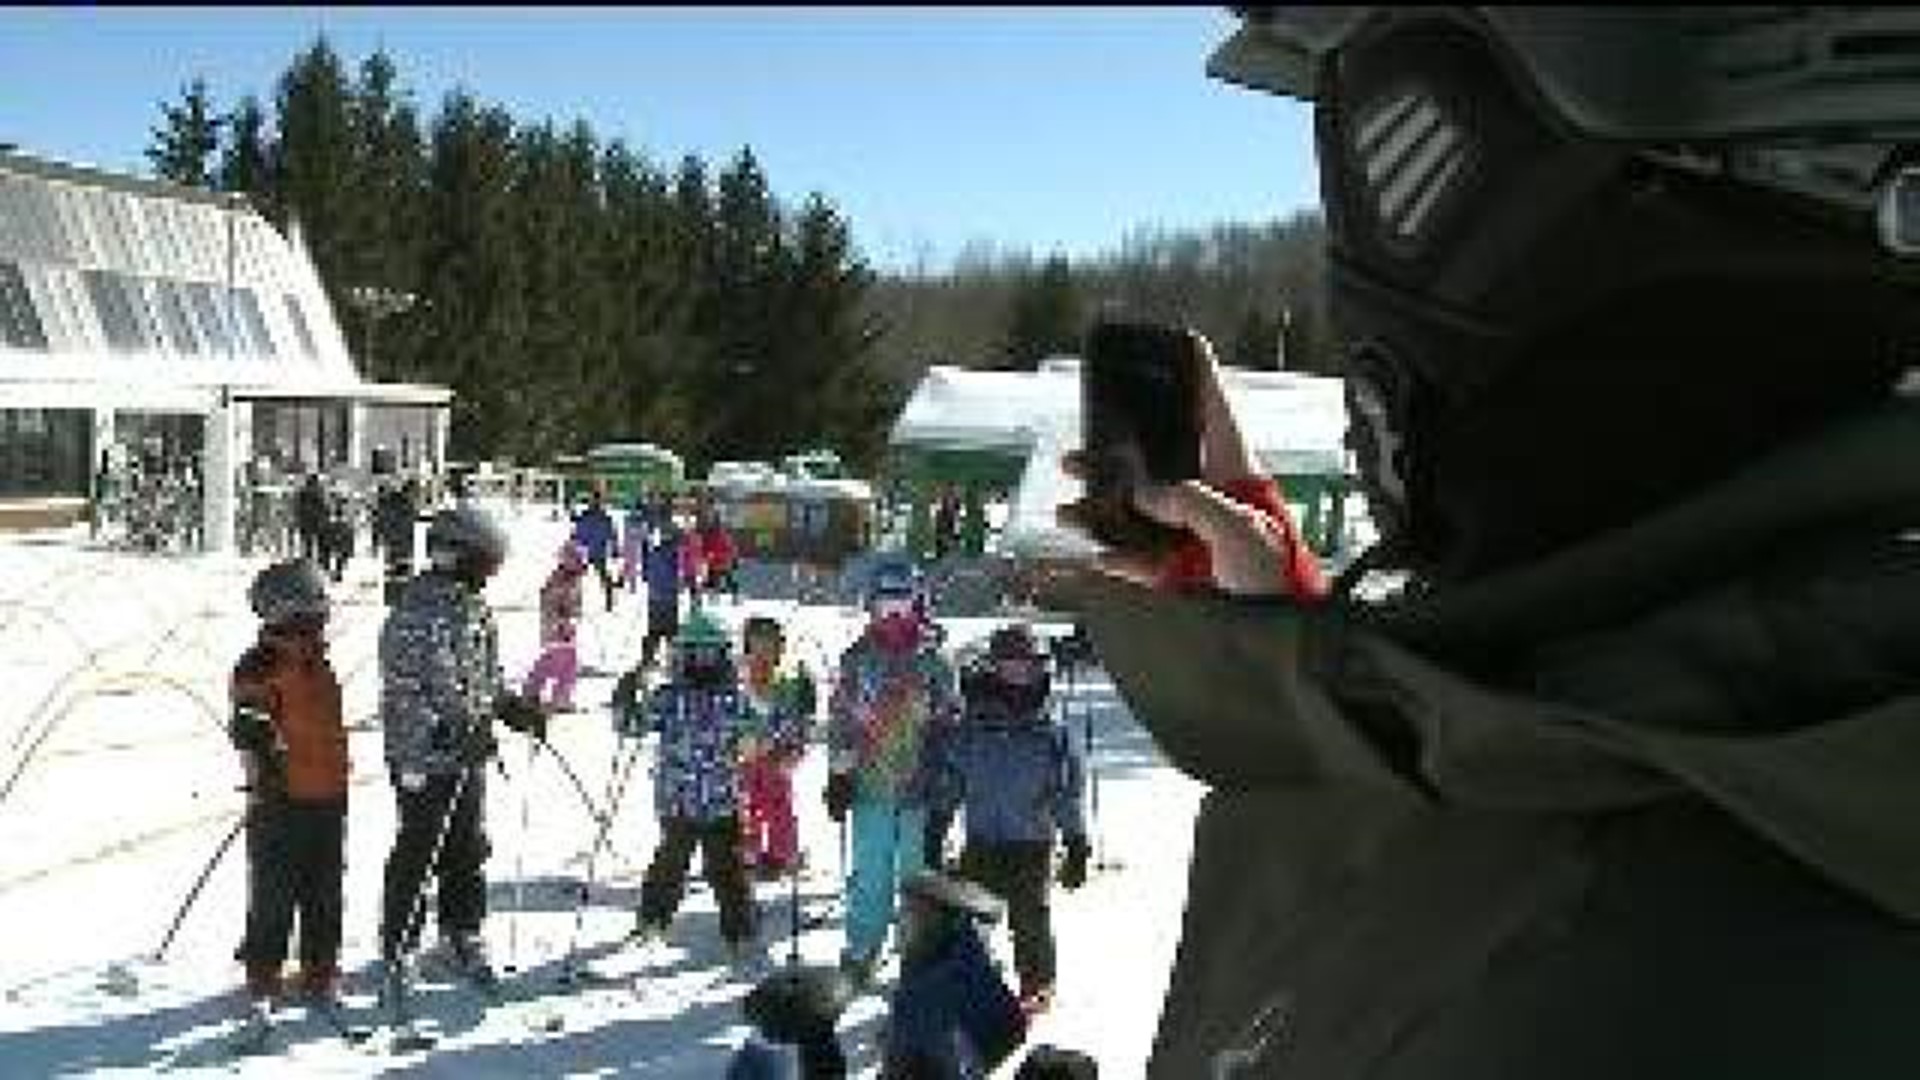 Snowy Weather Plays Along with Ski Resorts